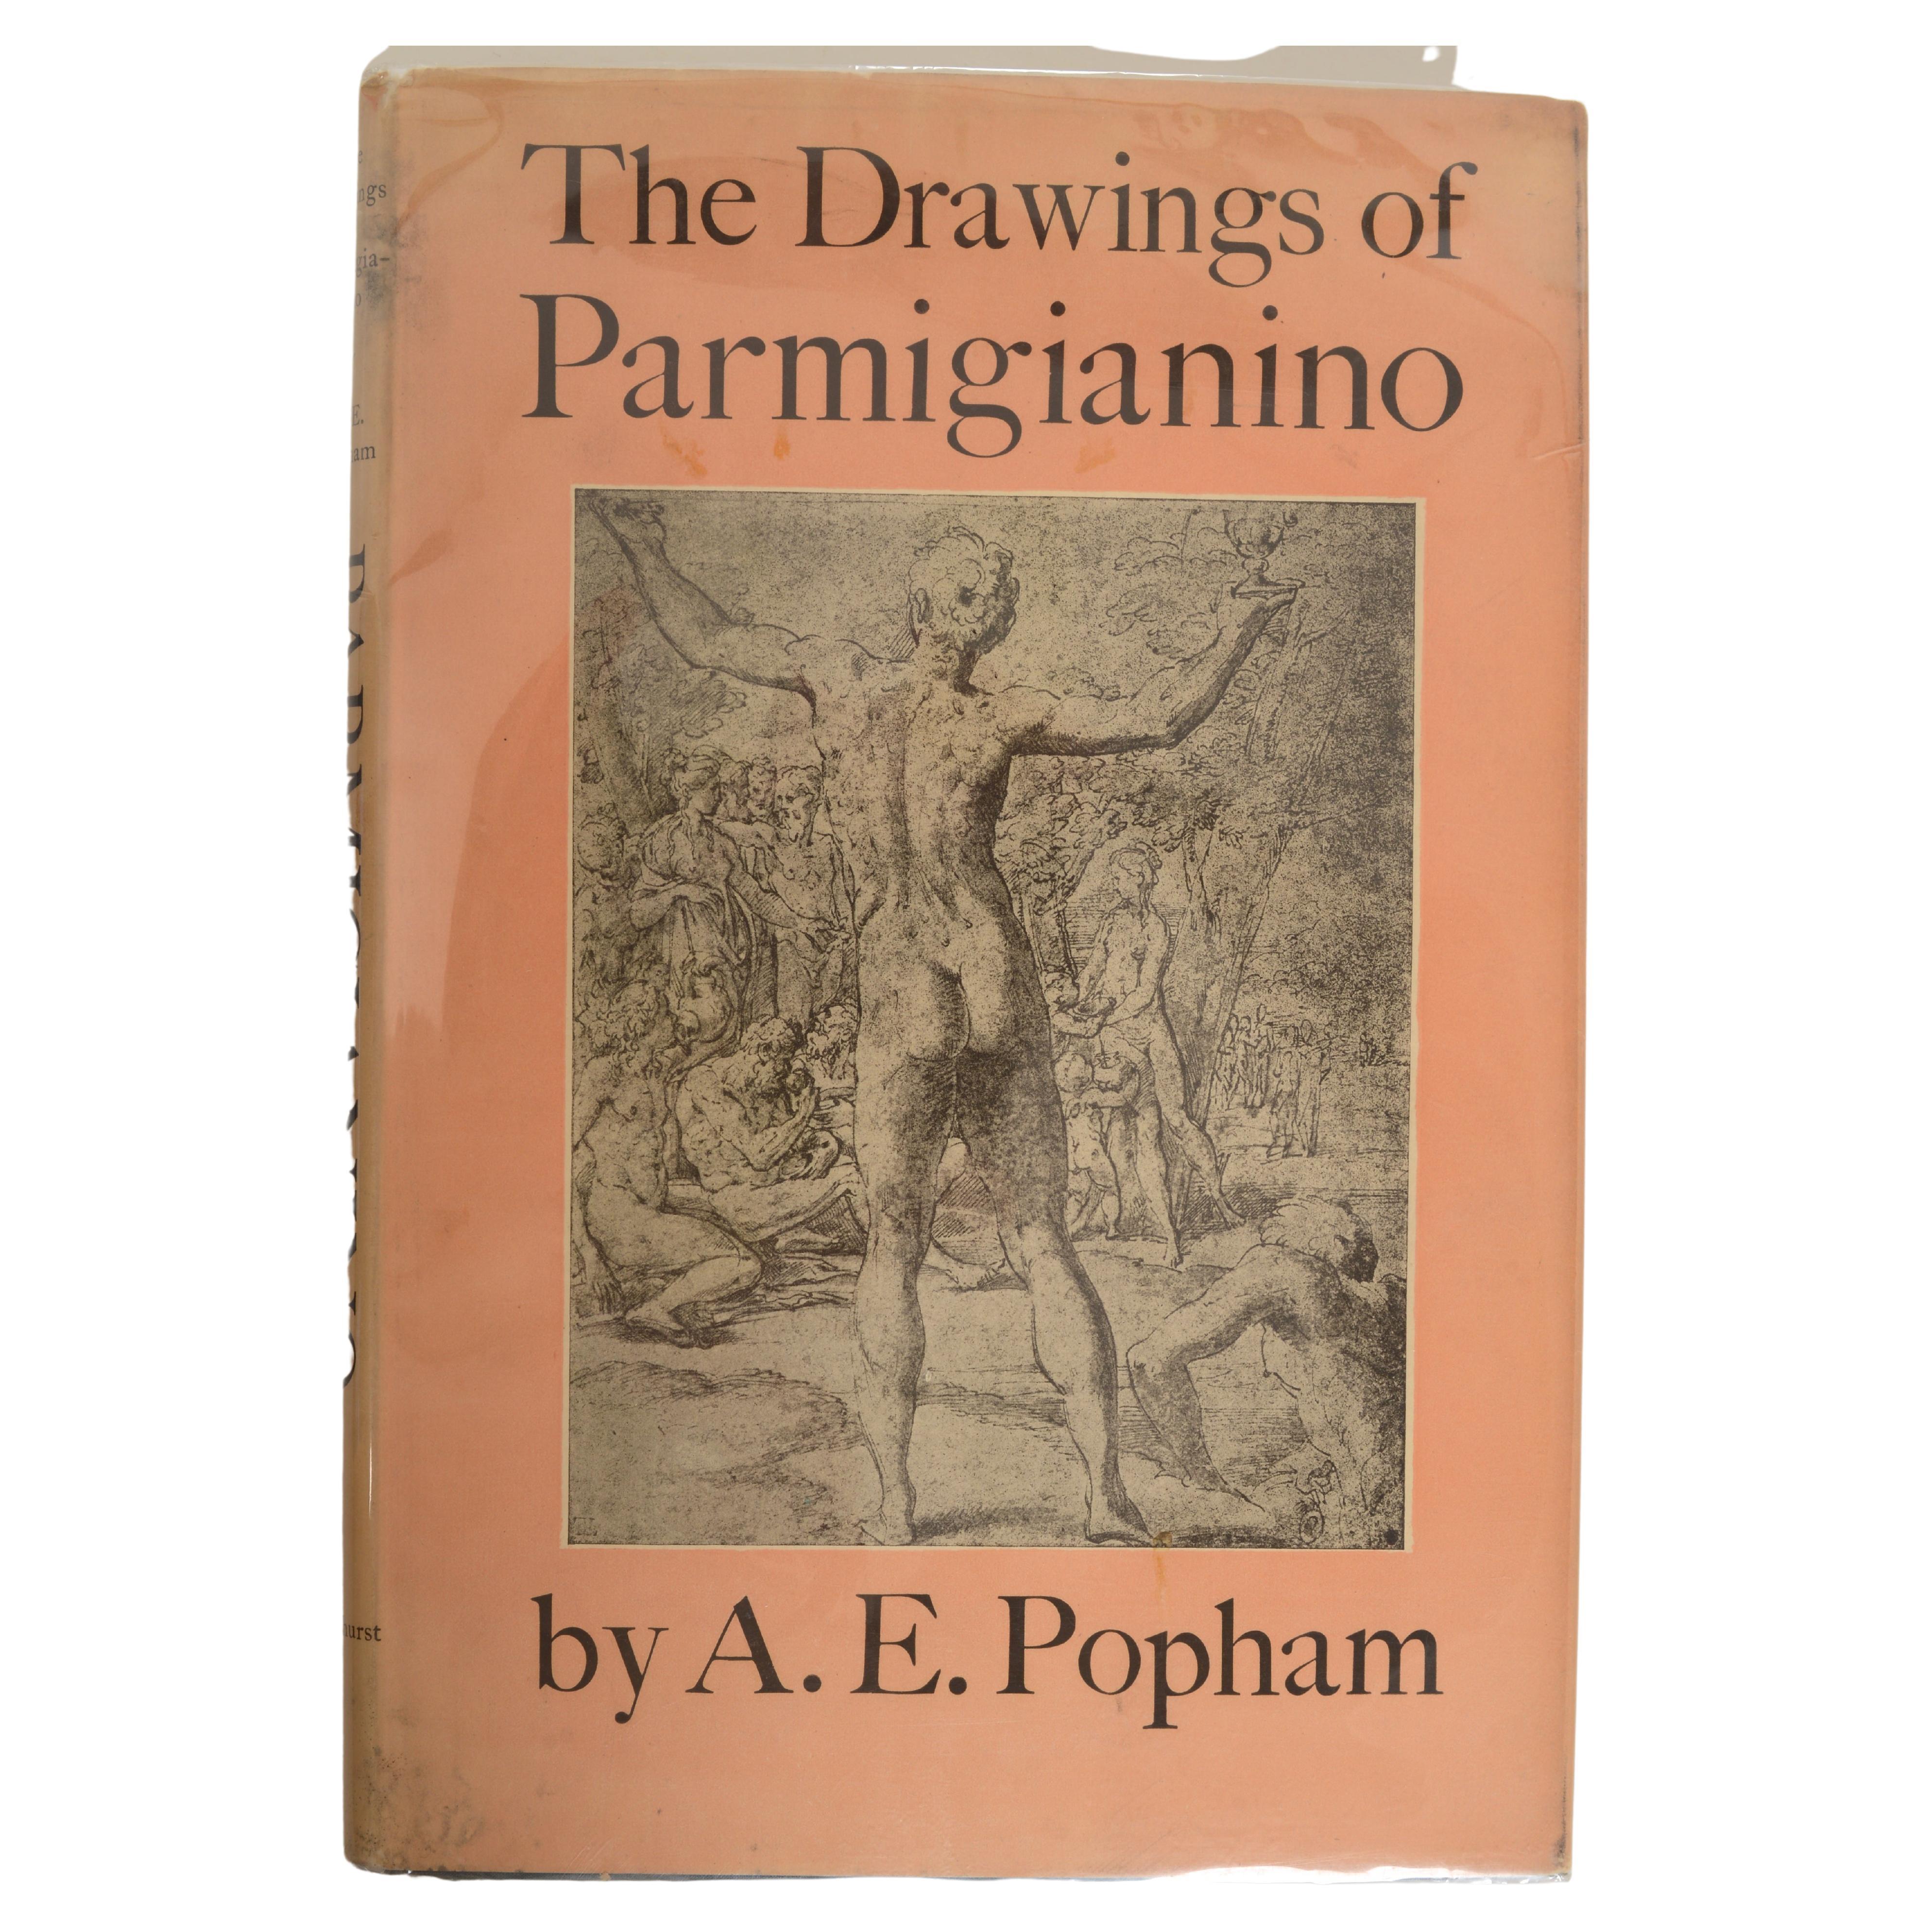 Drawings of Parmigianino by a. E. Popham, 1st Ed